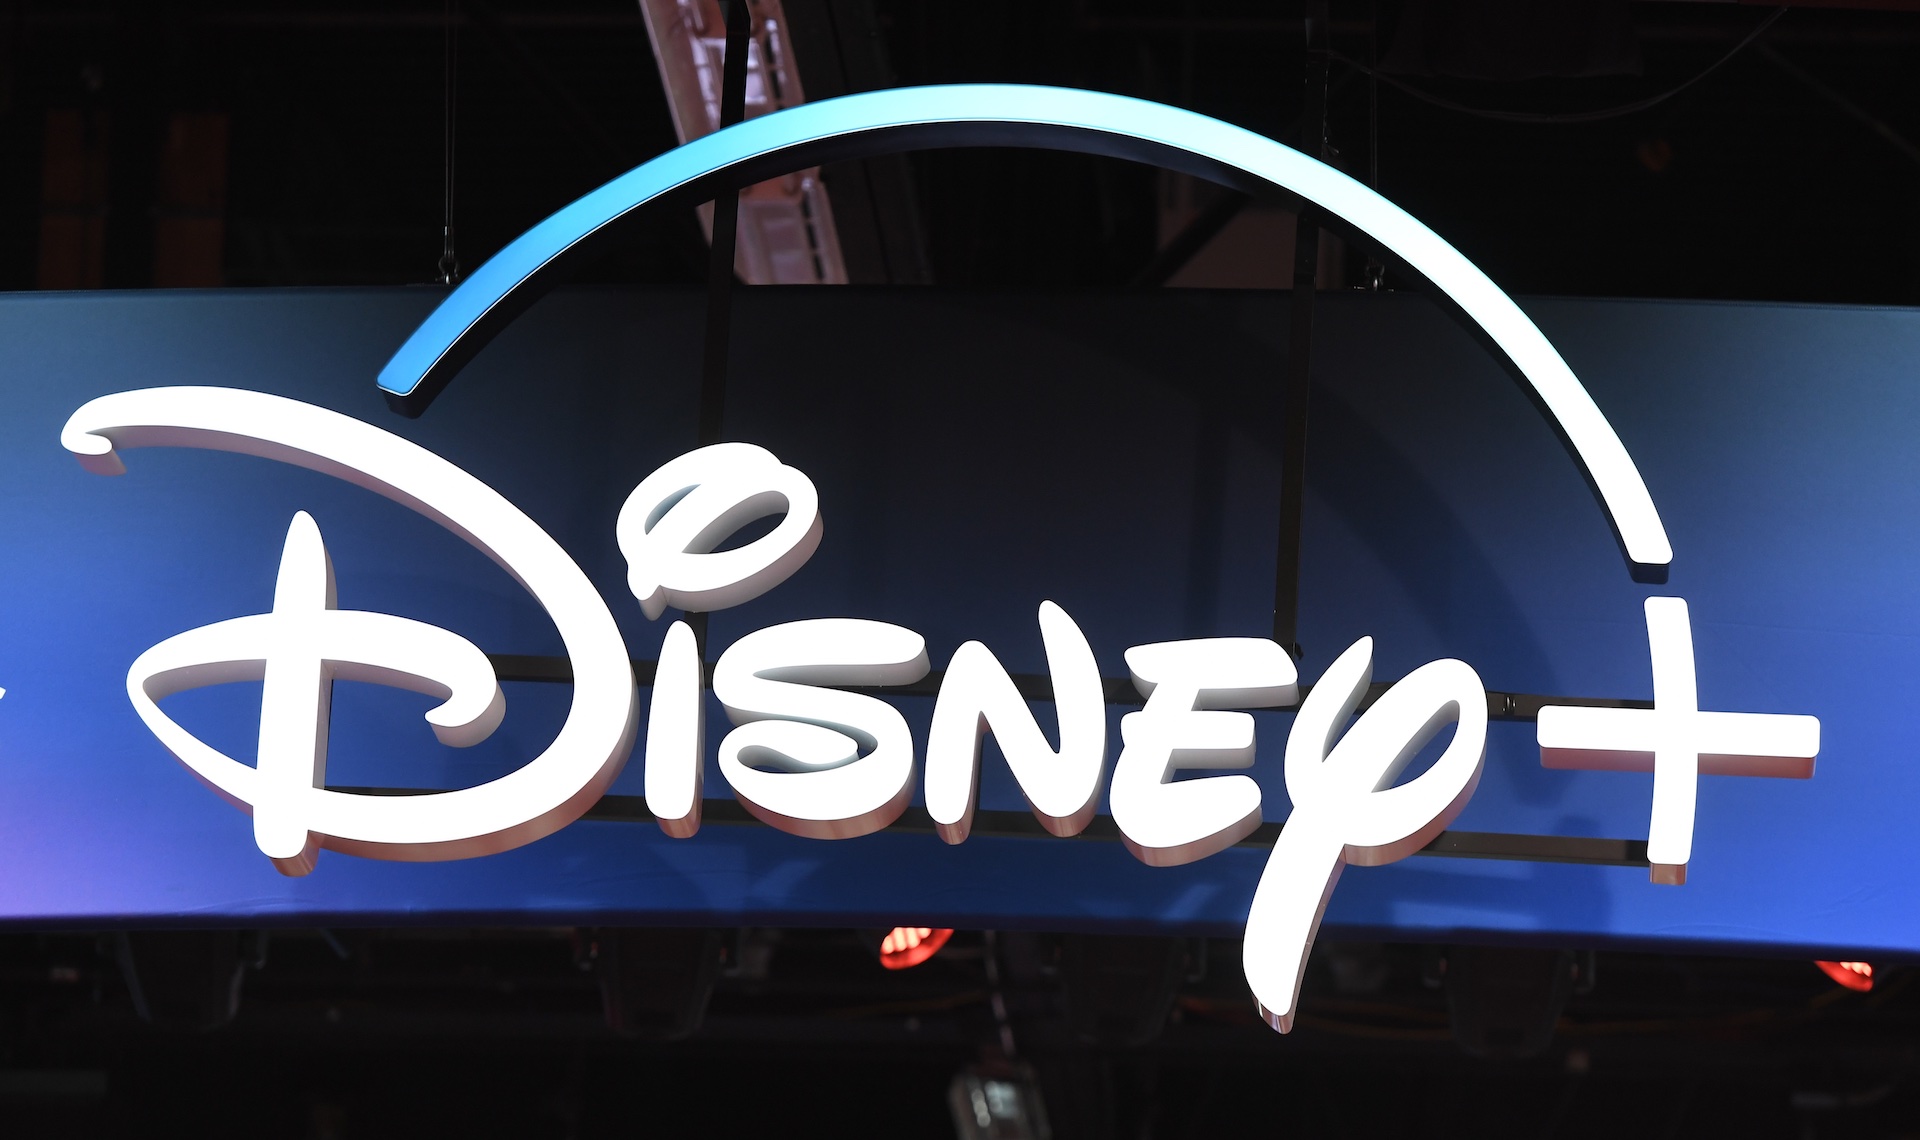  Disney Plus Premier Access: What Is It, and How Much Is It?